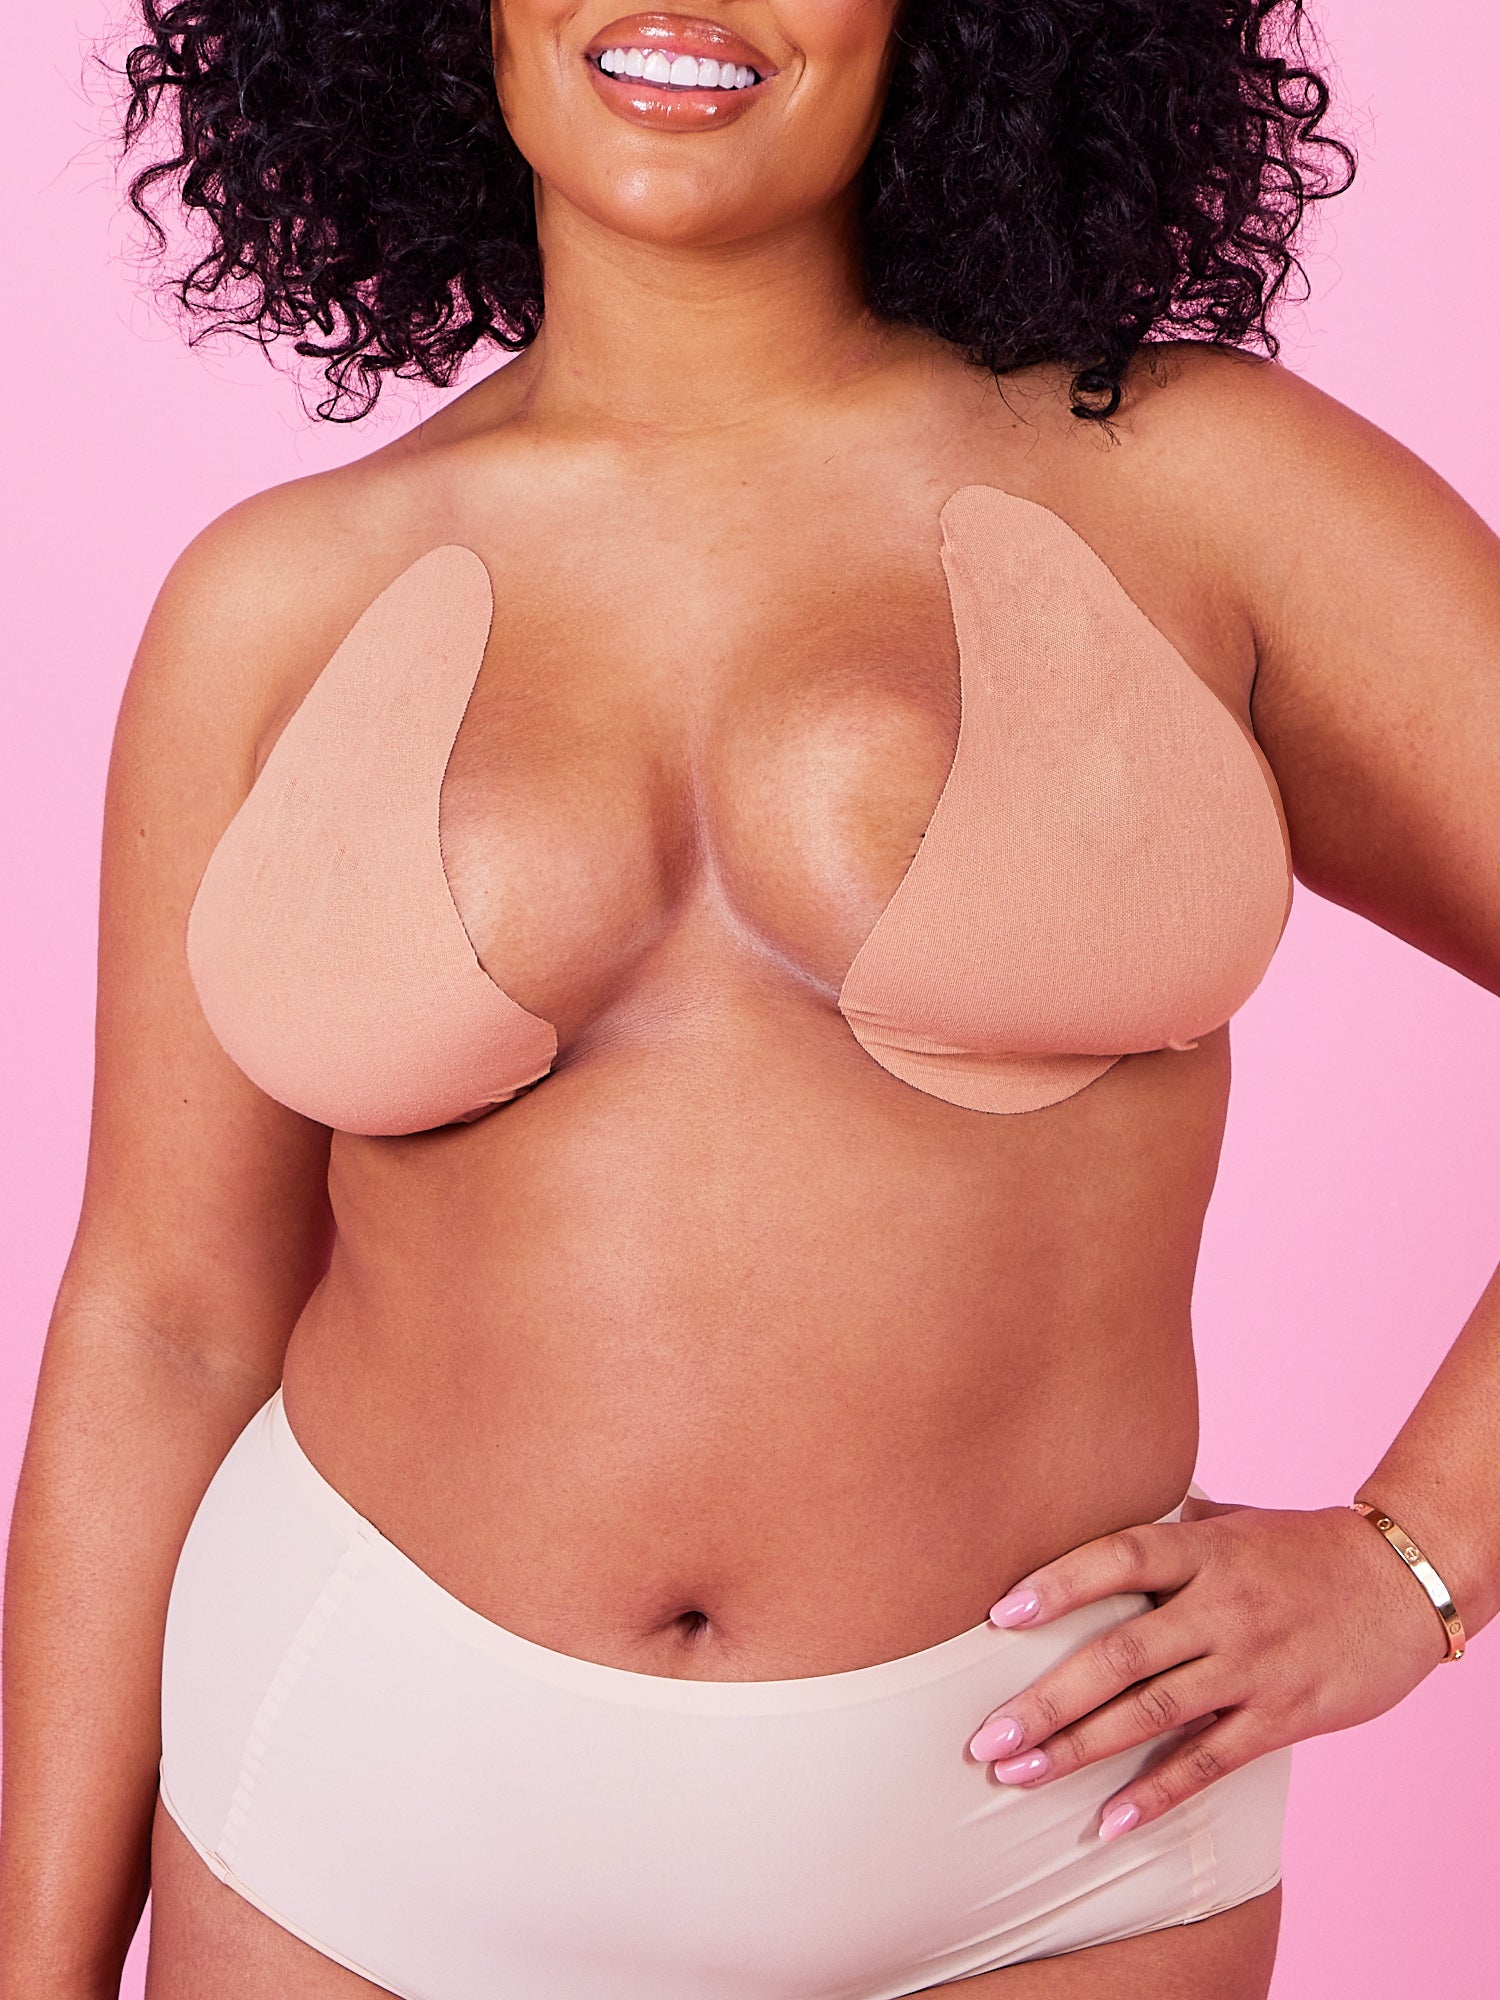 18+ - Perky Pair of D-Cup Silicone Breasts 